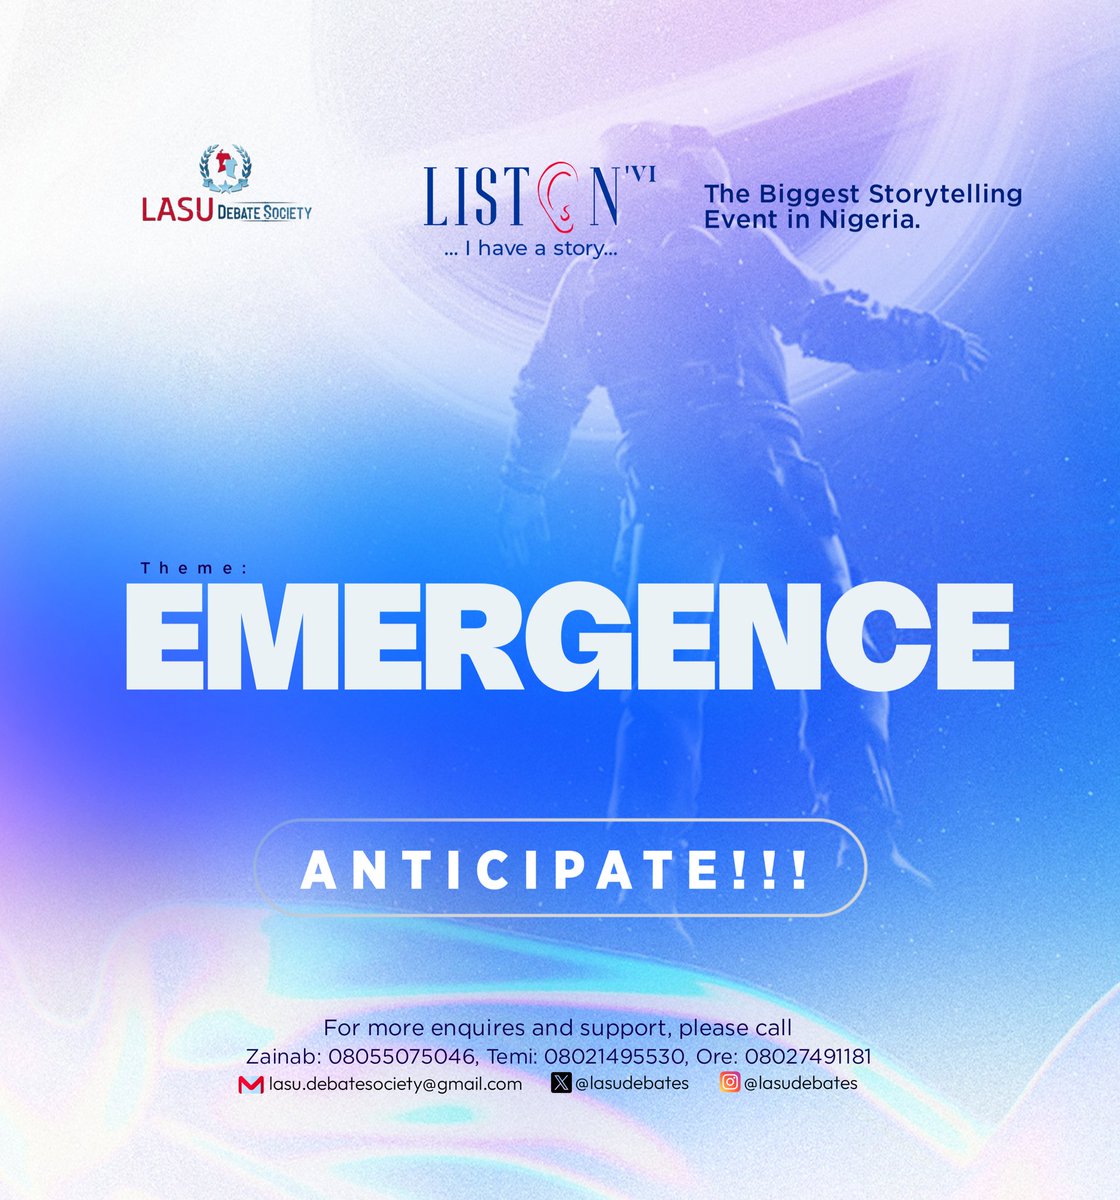 UNVEILING THE THEME FOR THE 6TH EDITION OF THE BIGGEST STORYTELLING EVENT IN NIGERIA 🤩🤩 ARE YOU READY FOR EMERGENCE❓❗ #LISTENVI #EMERGENCE